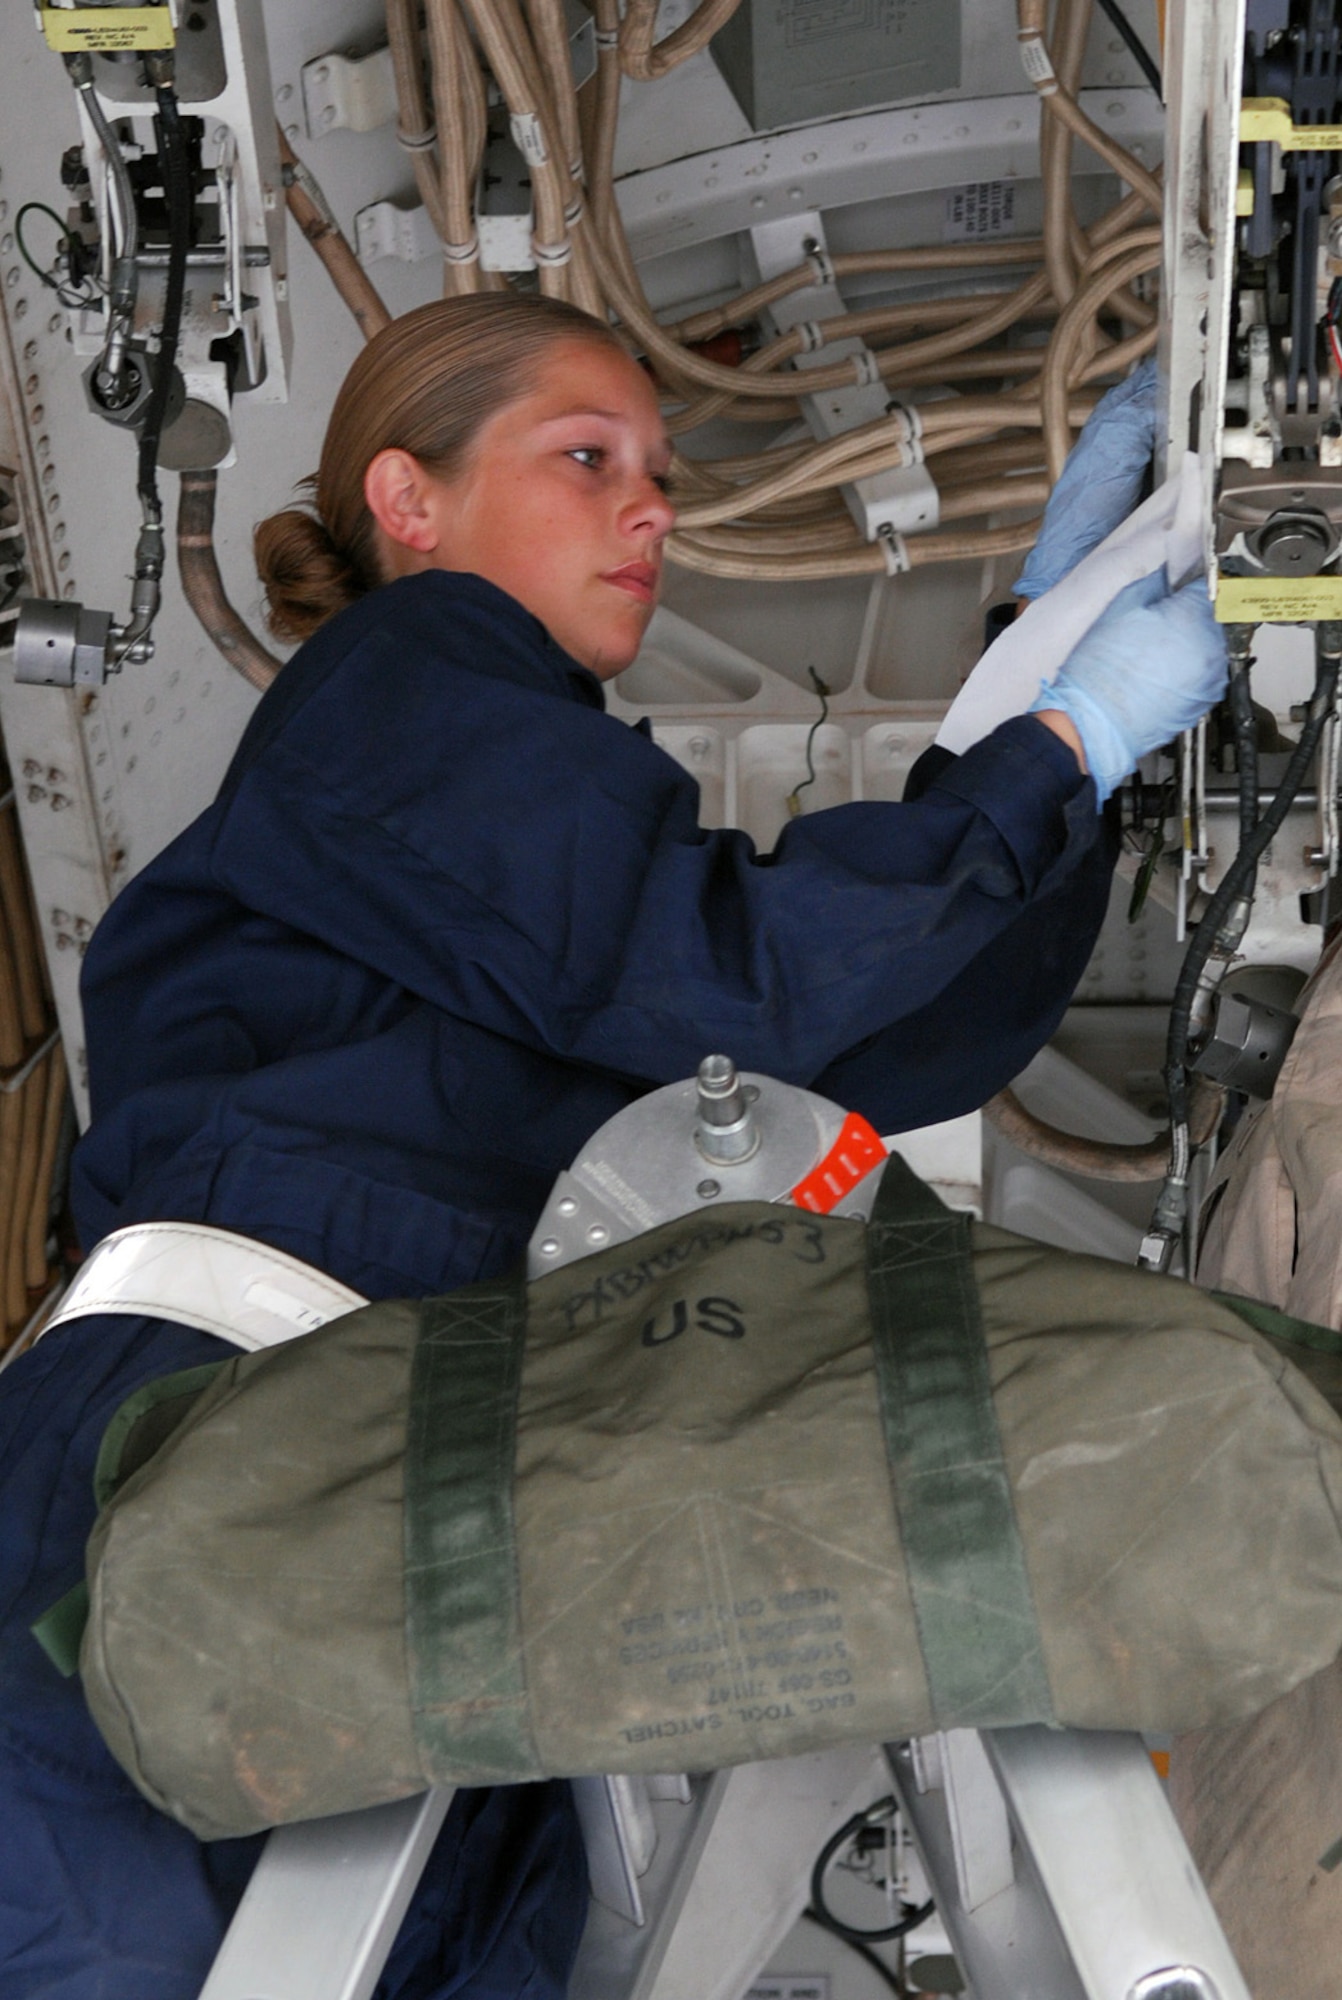 SOUTHWEST ASIA - Airman 1st Class Marjorie Carr, 379th Expeditionary Aircraft Maintenance Squadron, cleans the ordnance racks in the bomb bay of a B-1B Lancer Jan. 10 at a Soutwest Asia air base. The bomber has just returned from a mission. Airman Carr's home station is Dyess Air Force Base, Texas, and her home town is Grand Junction, Colo. (U. S. Air Force photo/Staff Sgt. Douglas Olsen)